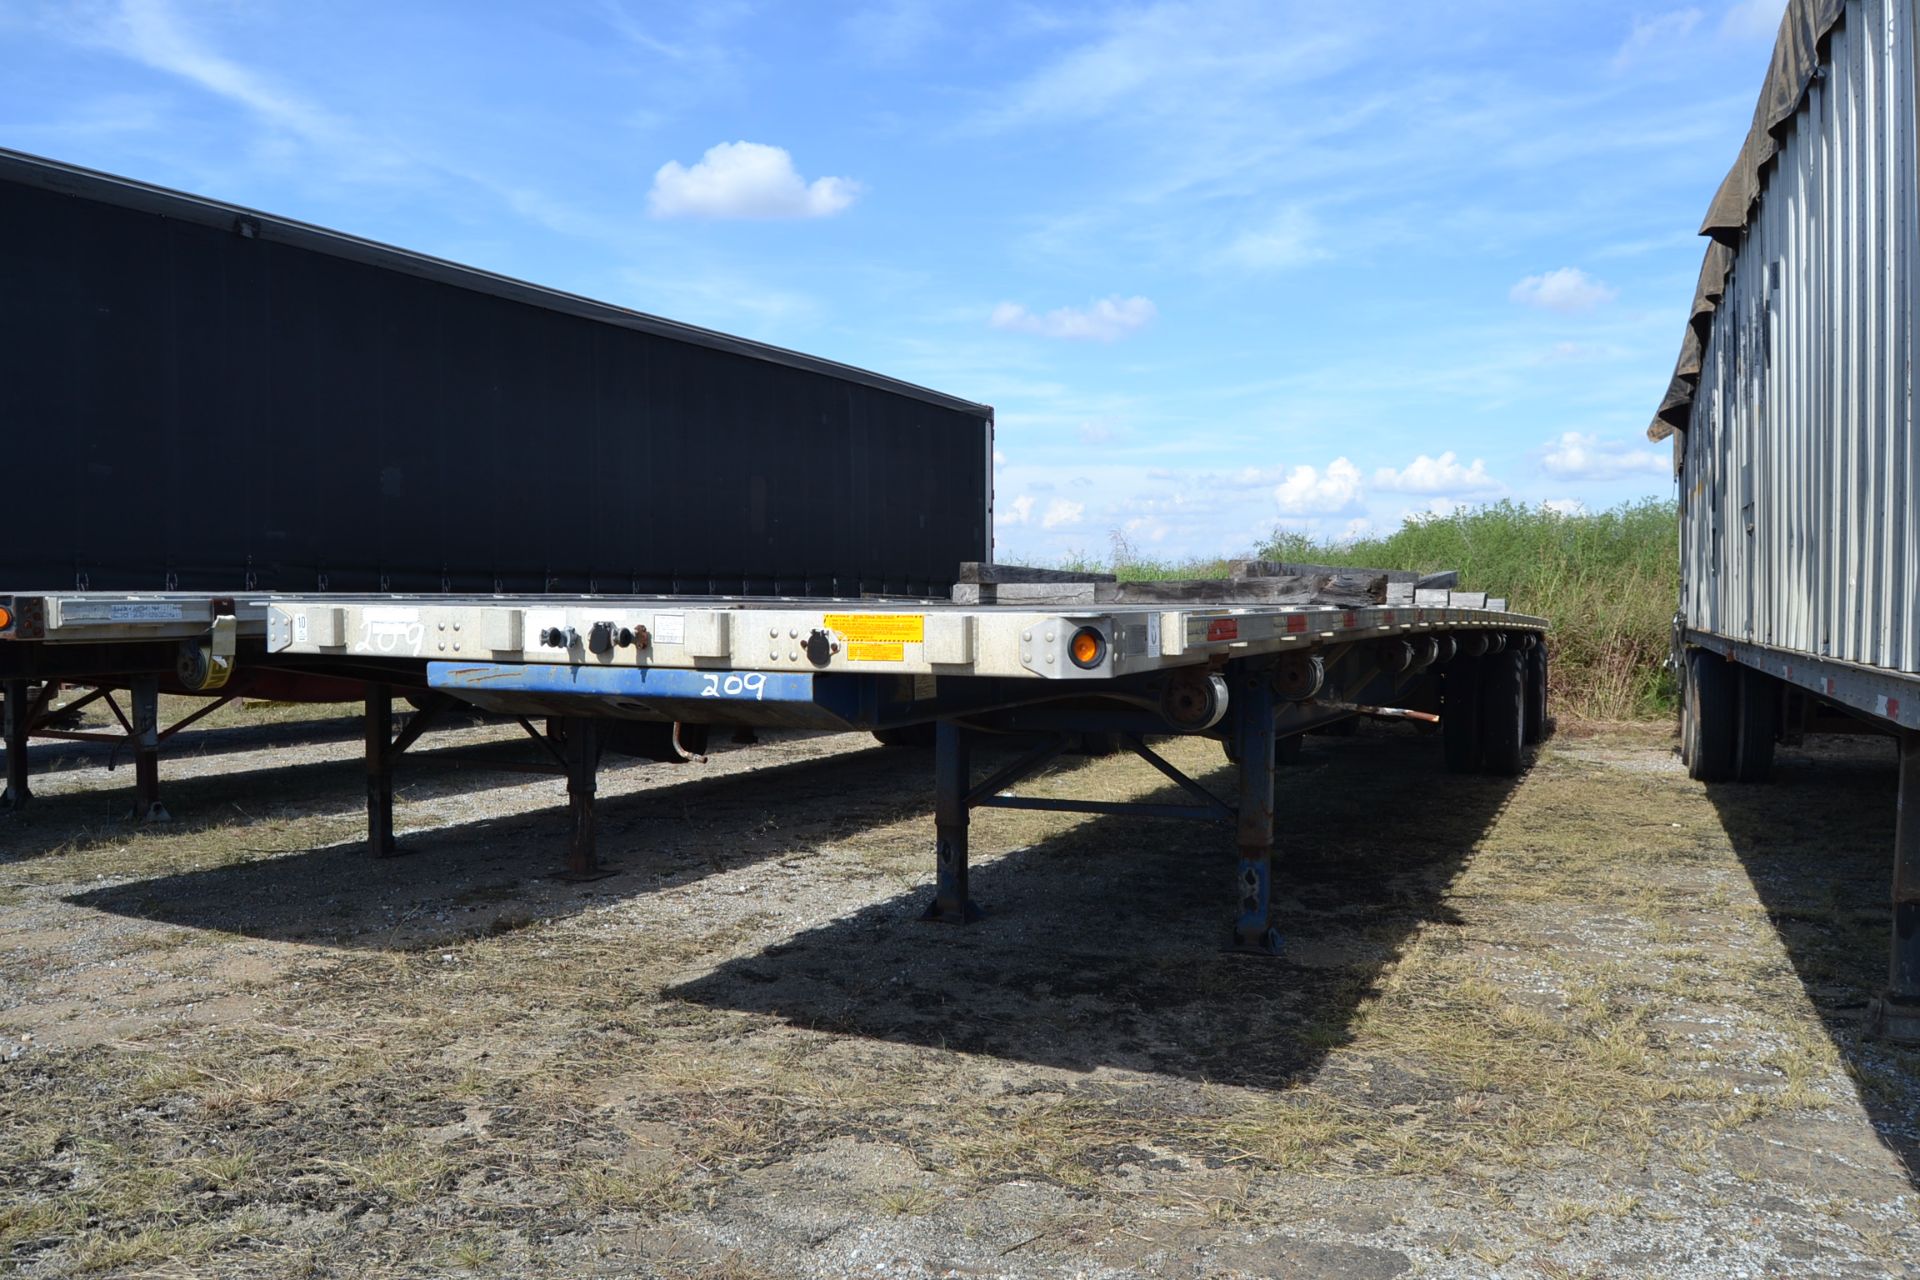 2003 UTILITY 48' SREAD AXLE FLATBED TRAILER - Image 2 of 3